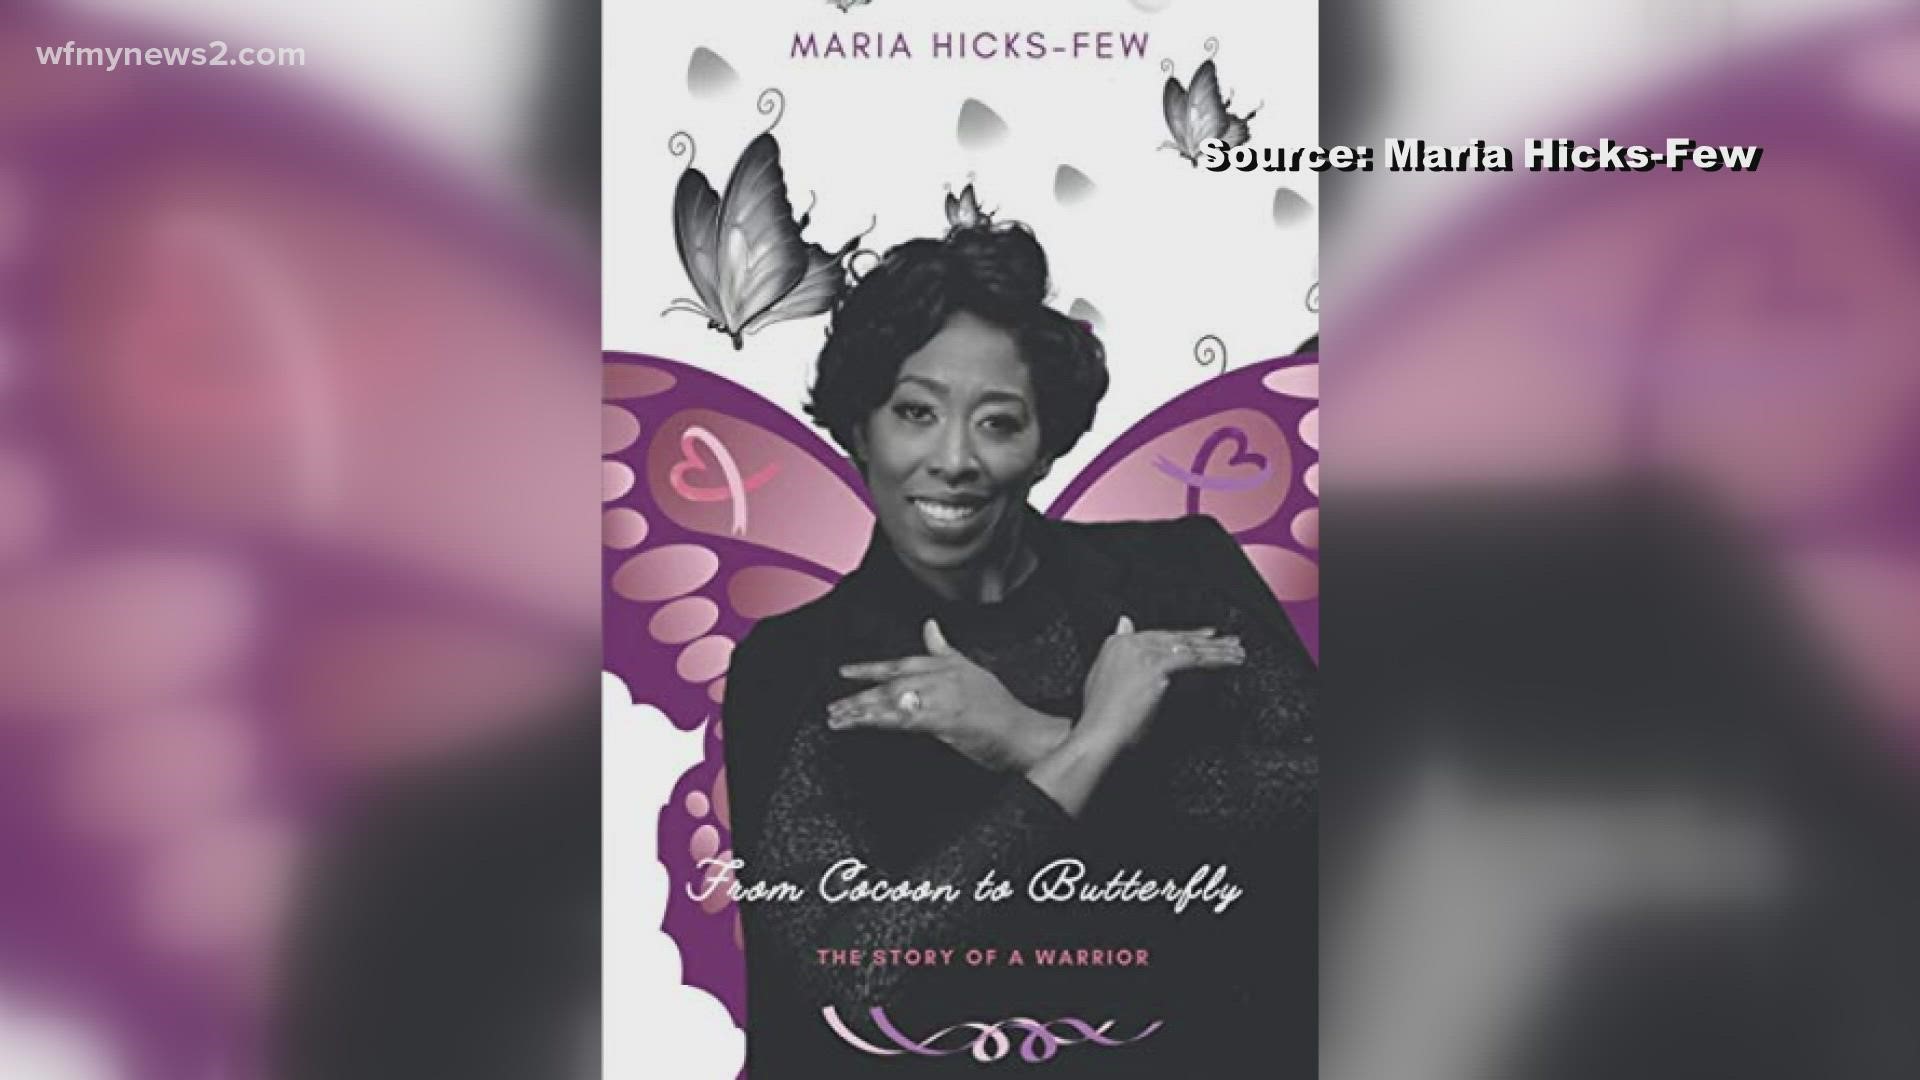 Maria Hicks-Few’s mission to save lives is inspired by her own breast cancer diagnosis. She’s helping those who cannot afford mammograms get screened for free.